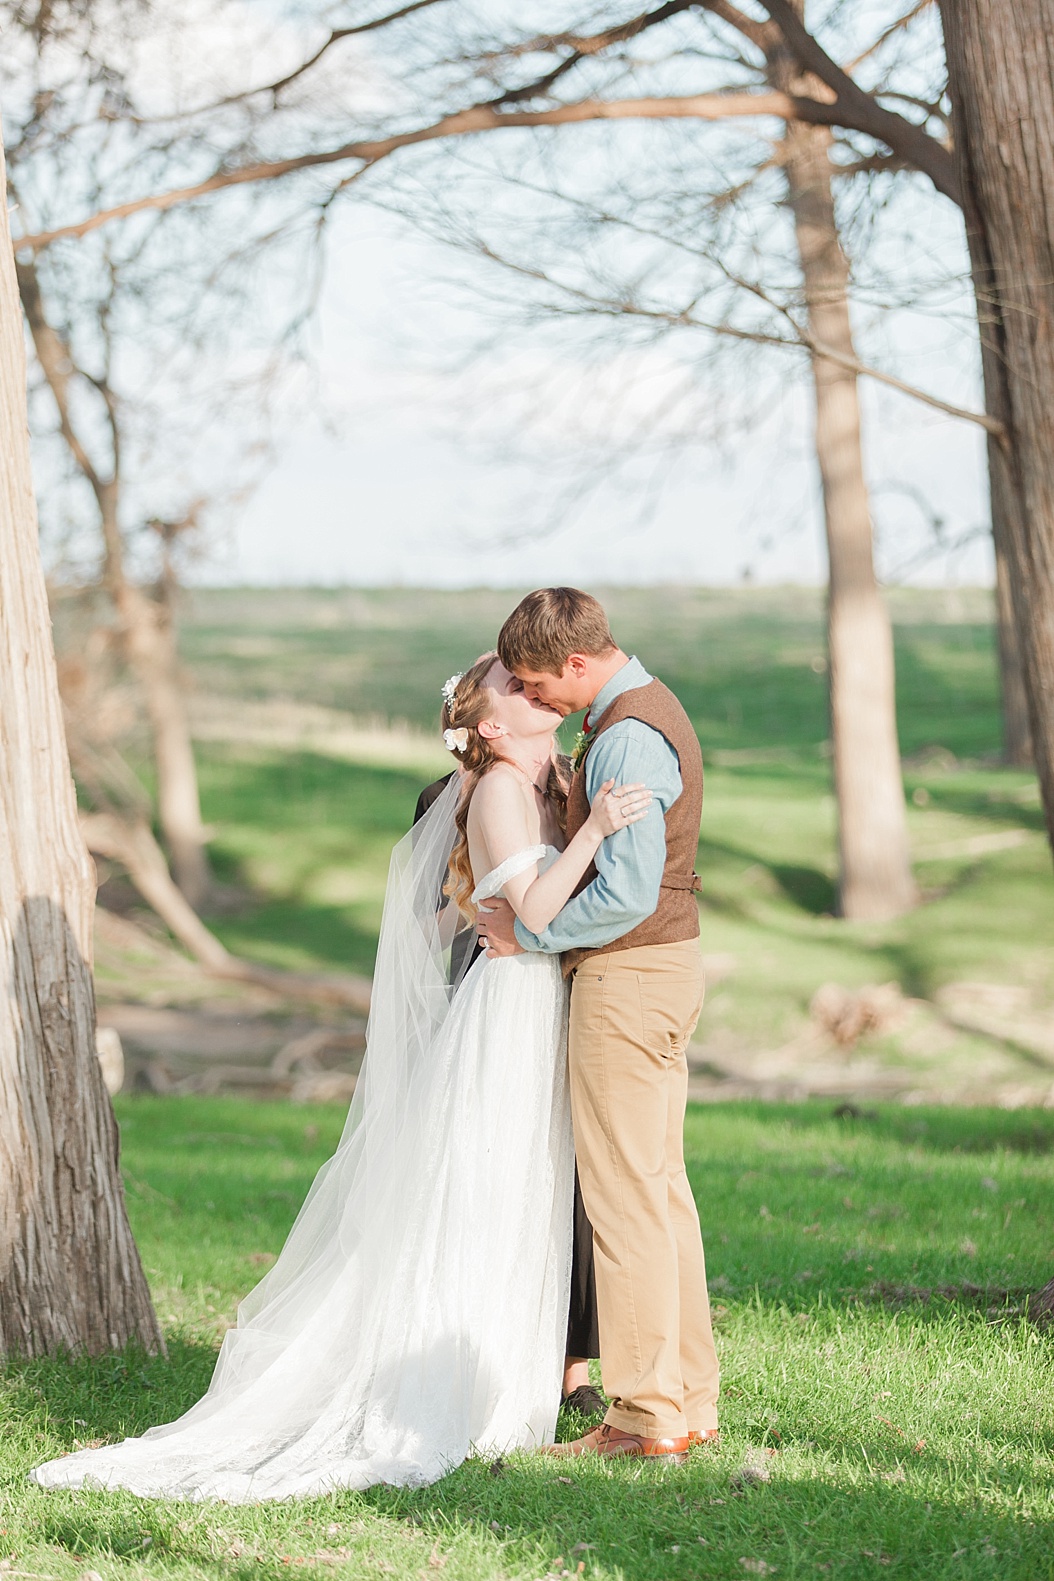 A spring boho wedding with greenery at Cherokee Rose Venue in Comfort Texas by Boerne Wedding Photographer Allison Jeffers Wedding Photography 0070